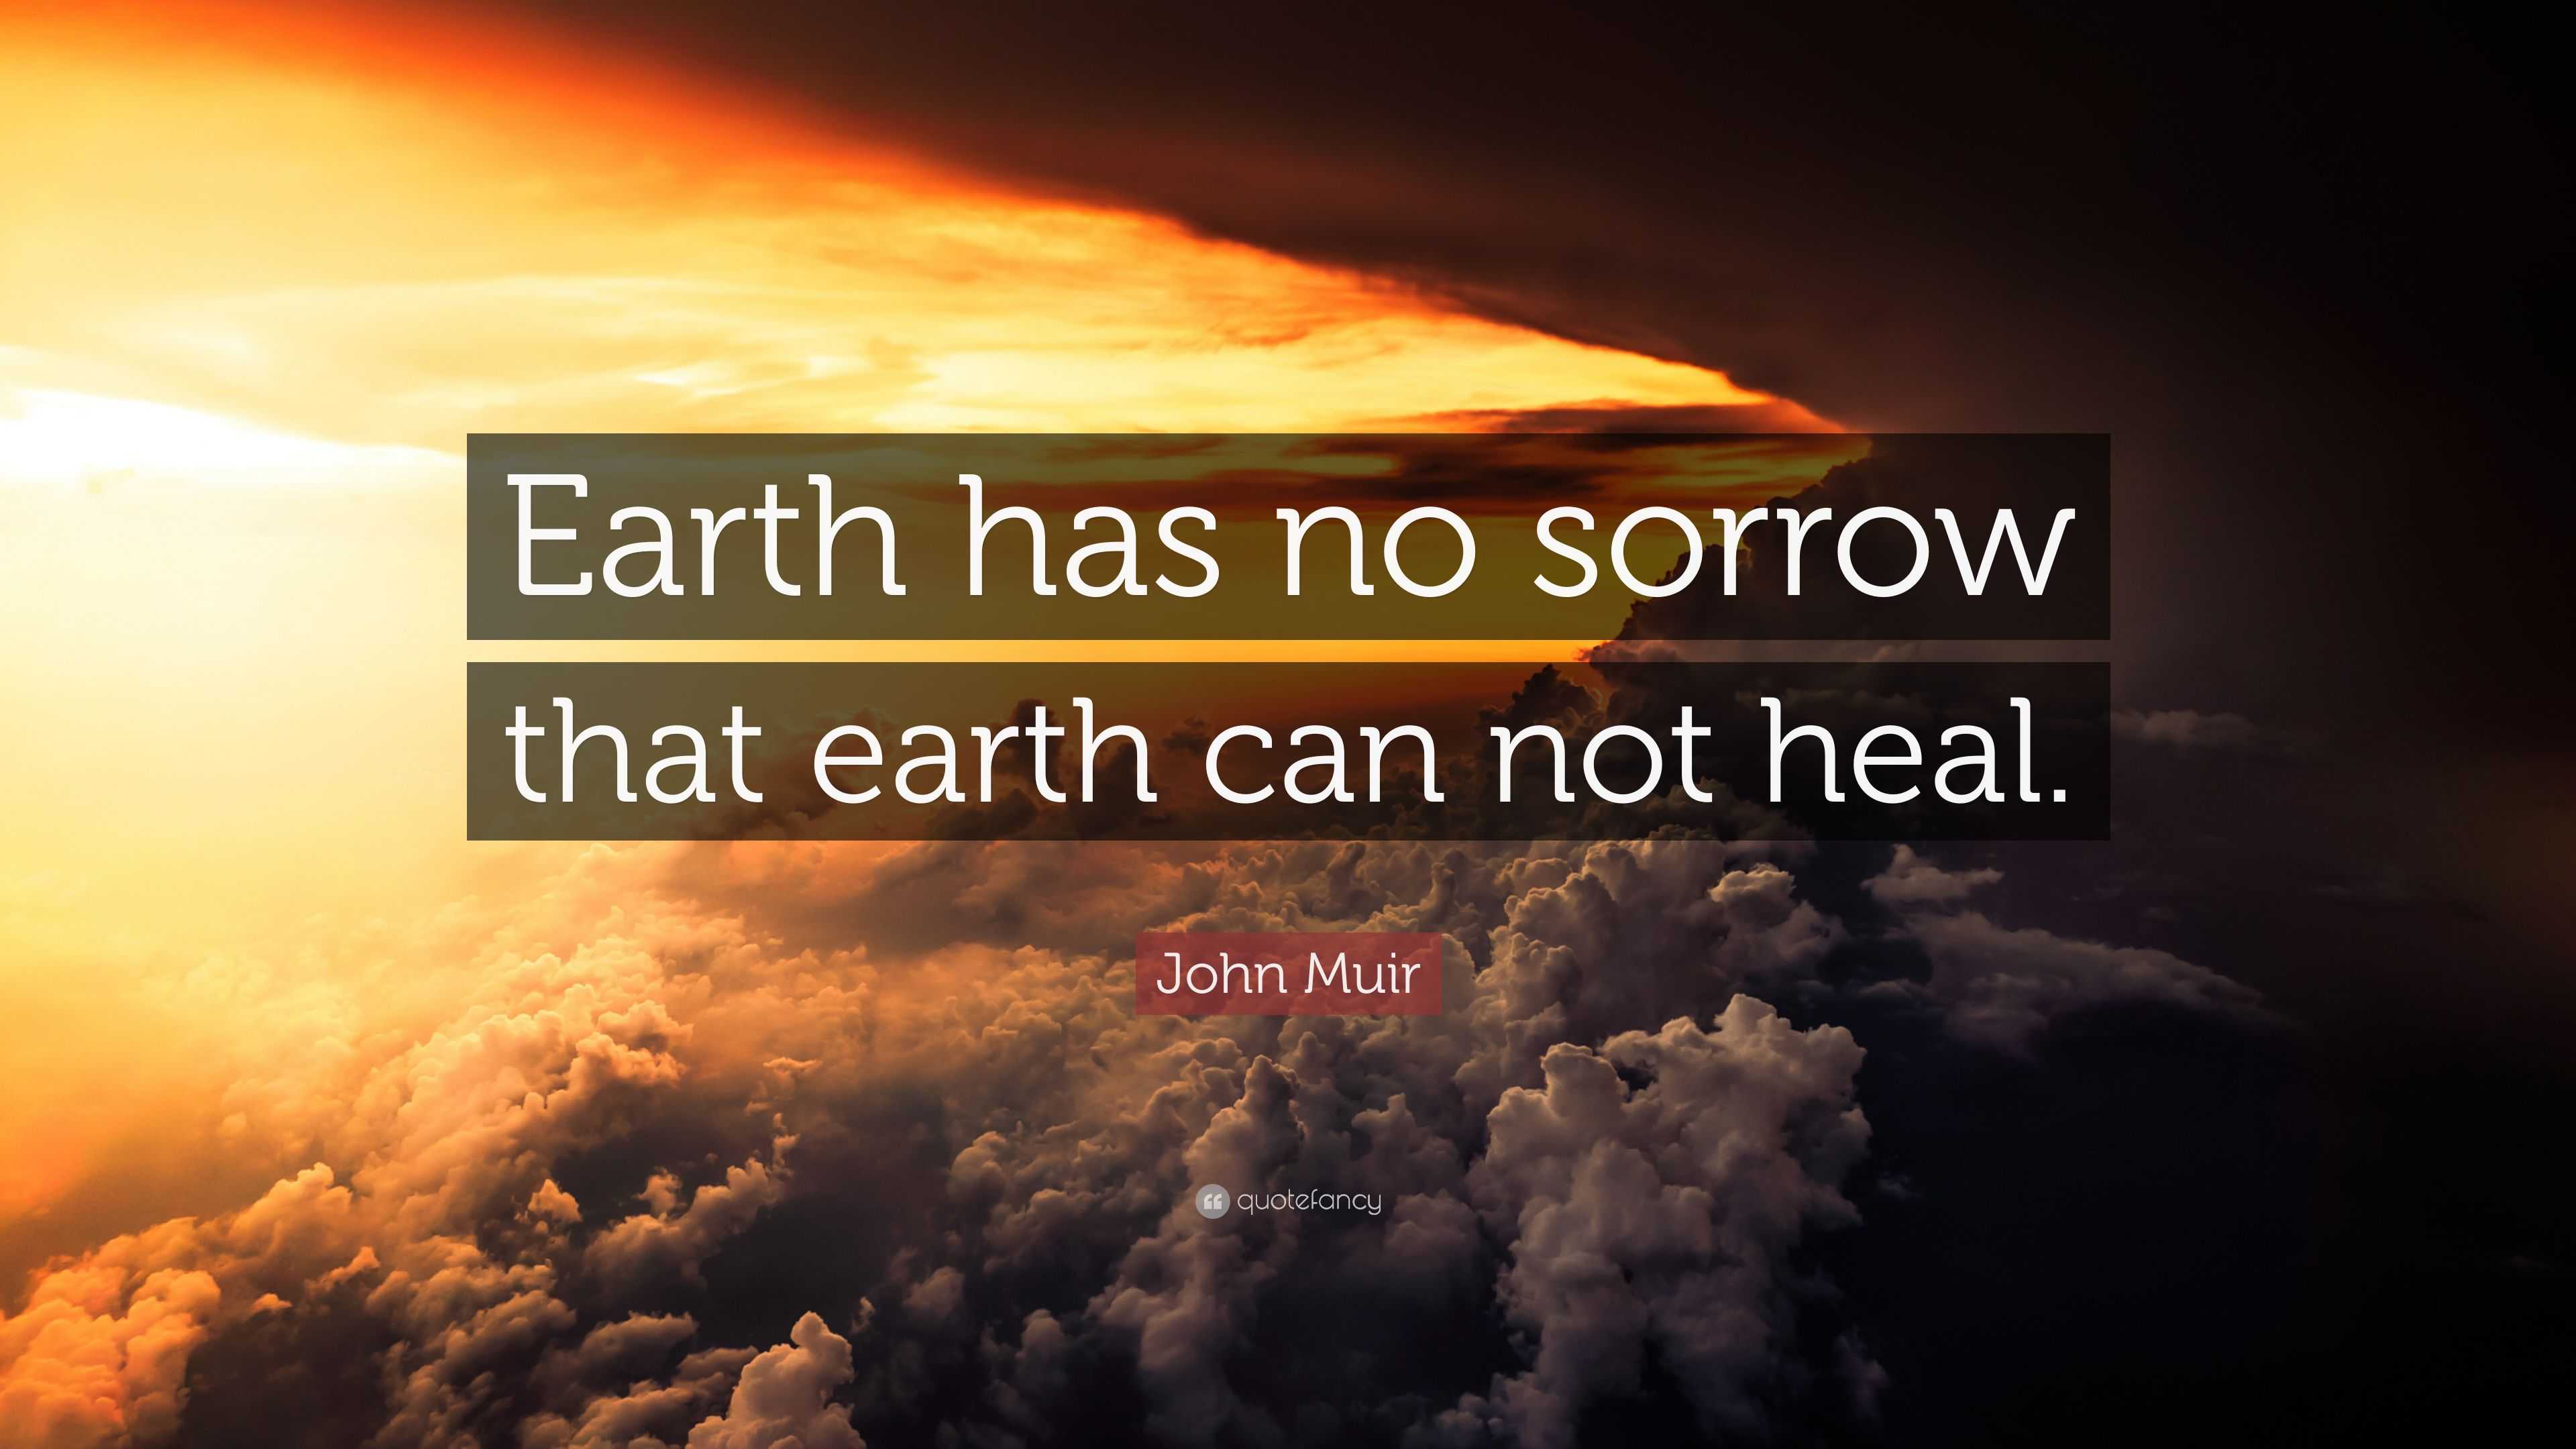 Download John Muir Quote: "Earth has no sorrow that earth can not ...